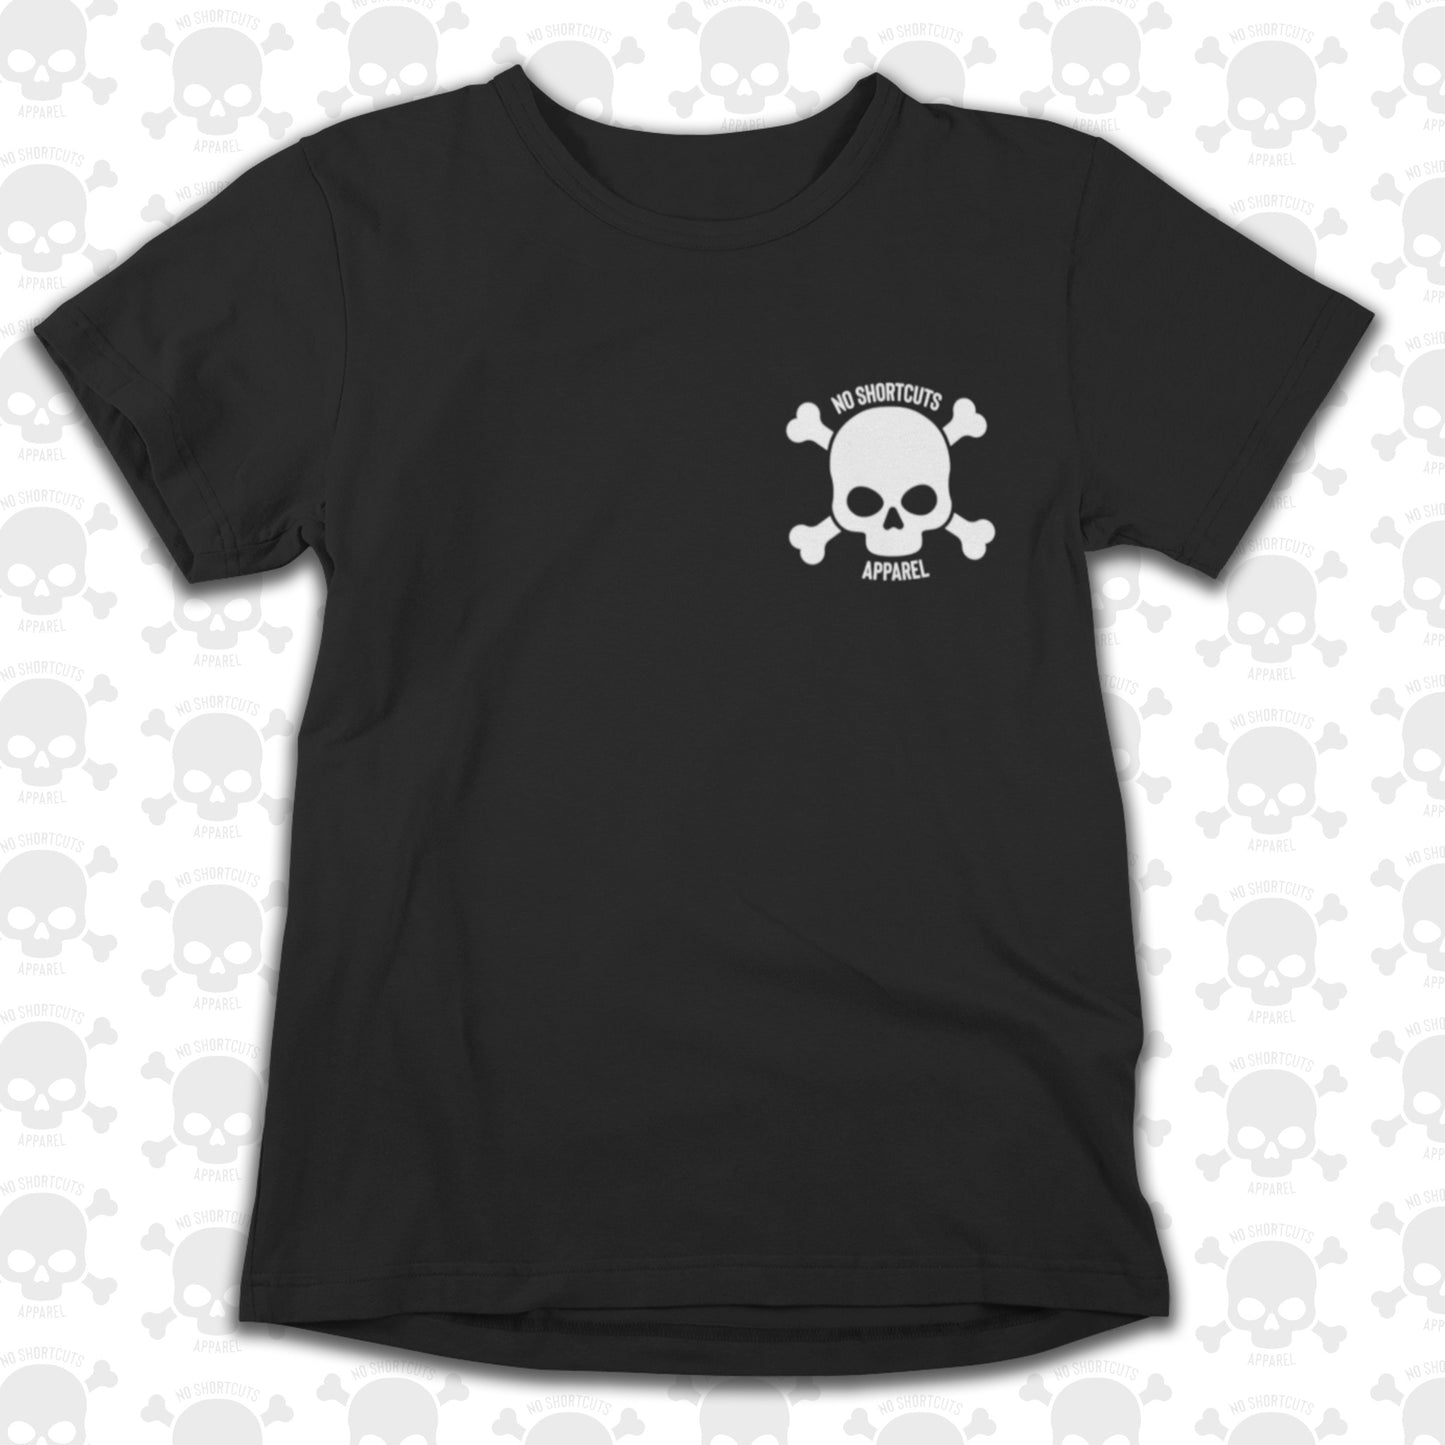 printable skull and crossbones images